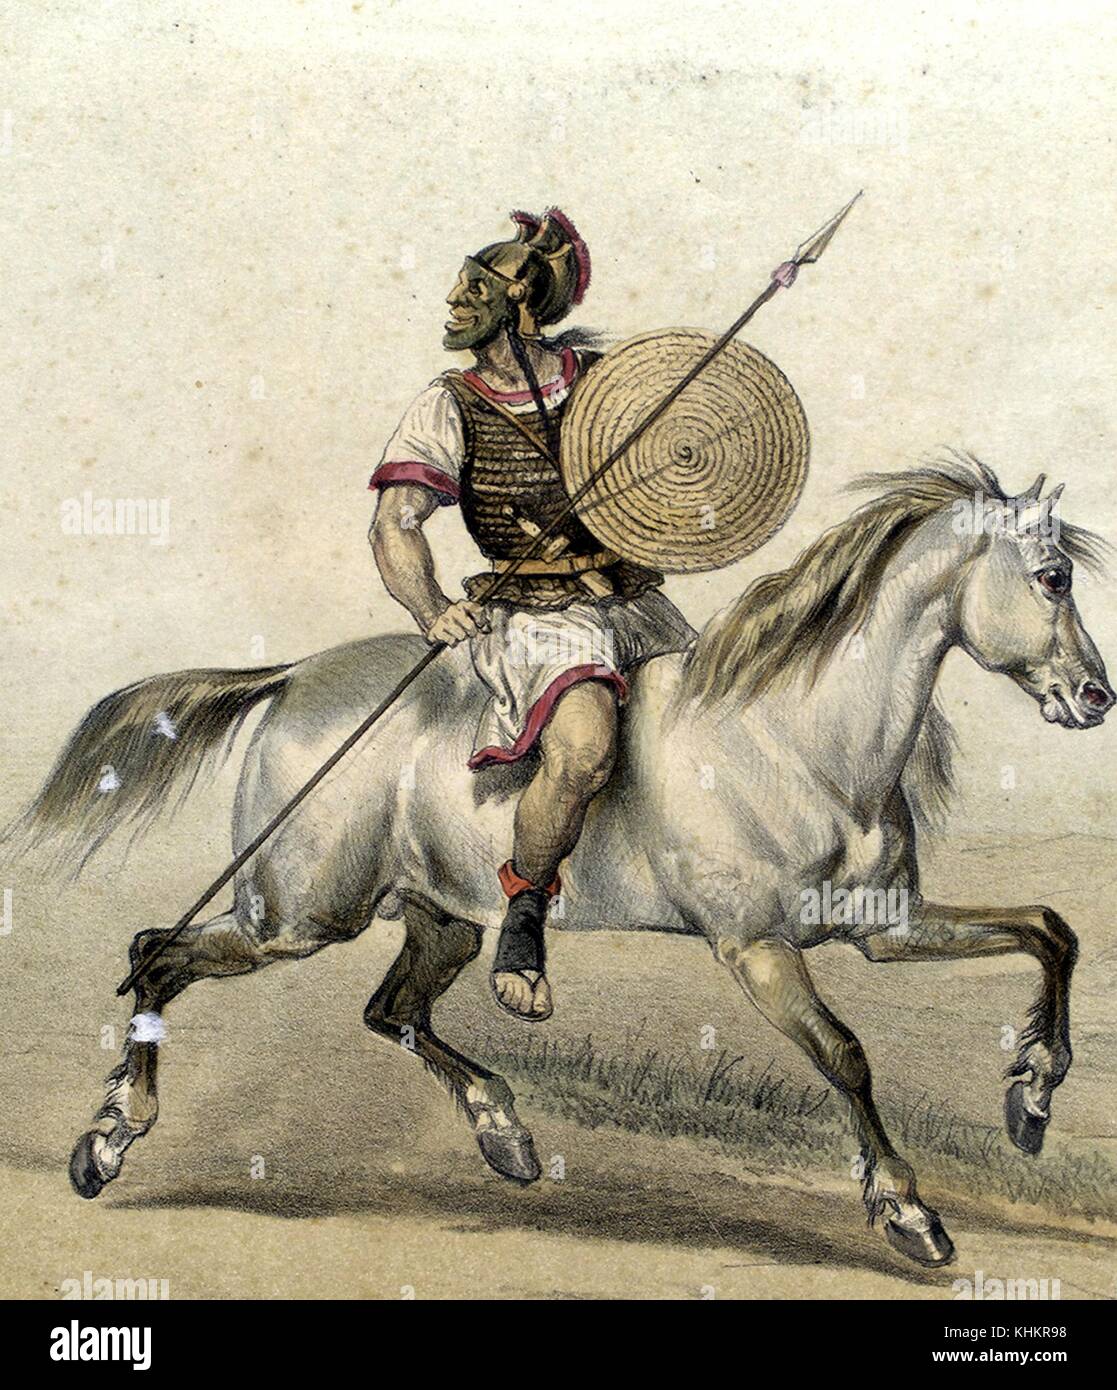 Color lithograph depicting a Cantabrian soldier, autonomous pre-Roman Spanish community from the north of the Iberian Peninsula, on horseback, from the book Album de la Caballeria Espanola, by General Conde de Clonard, 1861. From the New York Public Library. Stock Photo